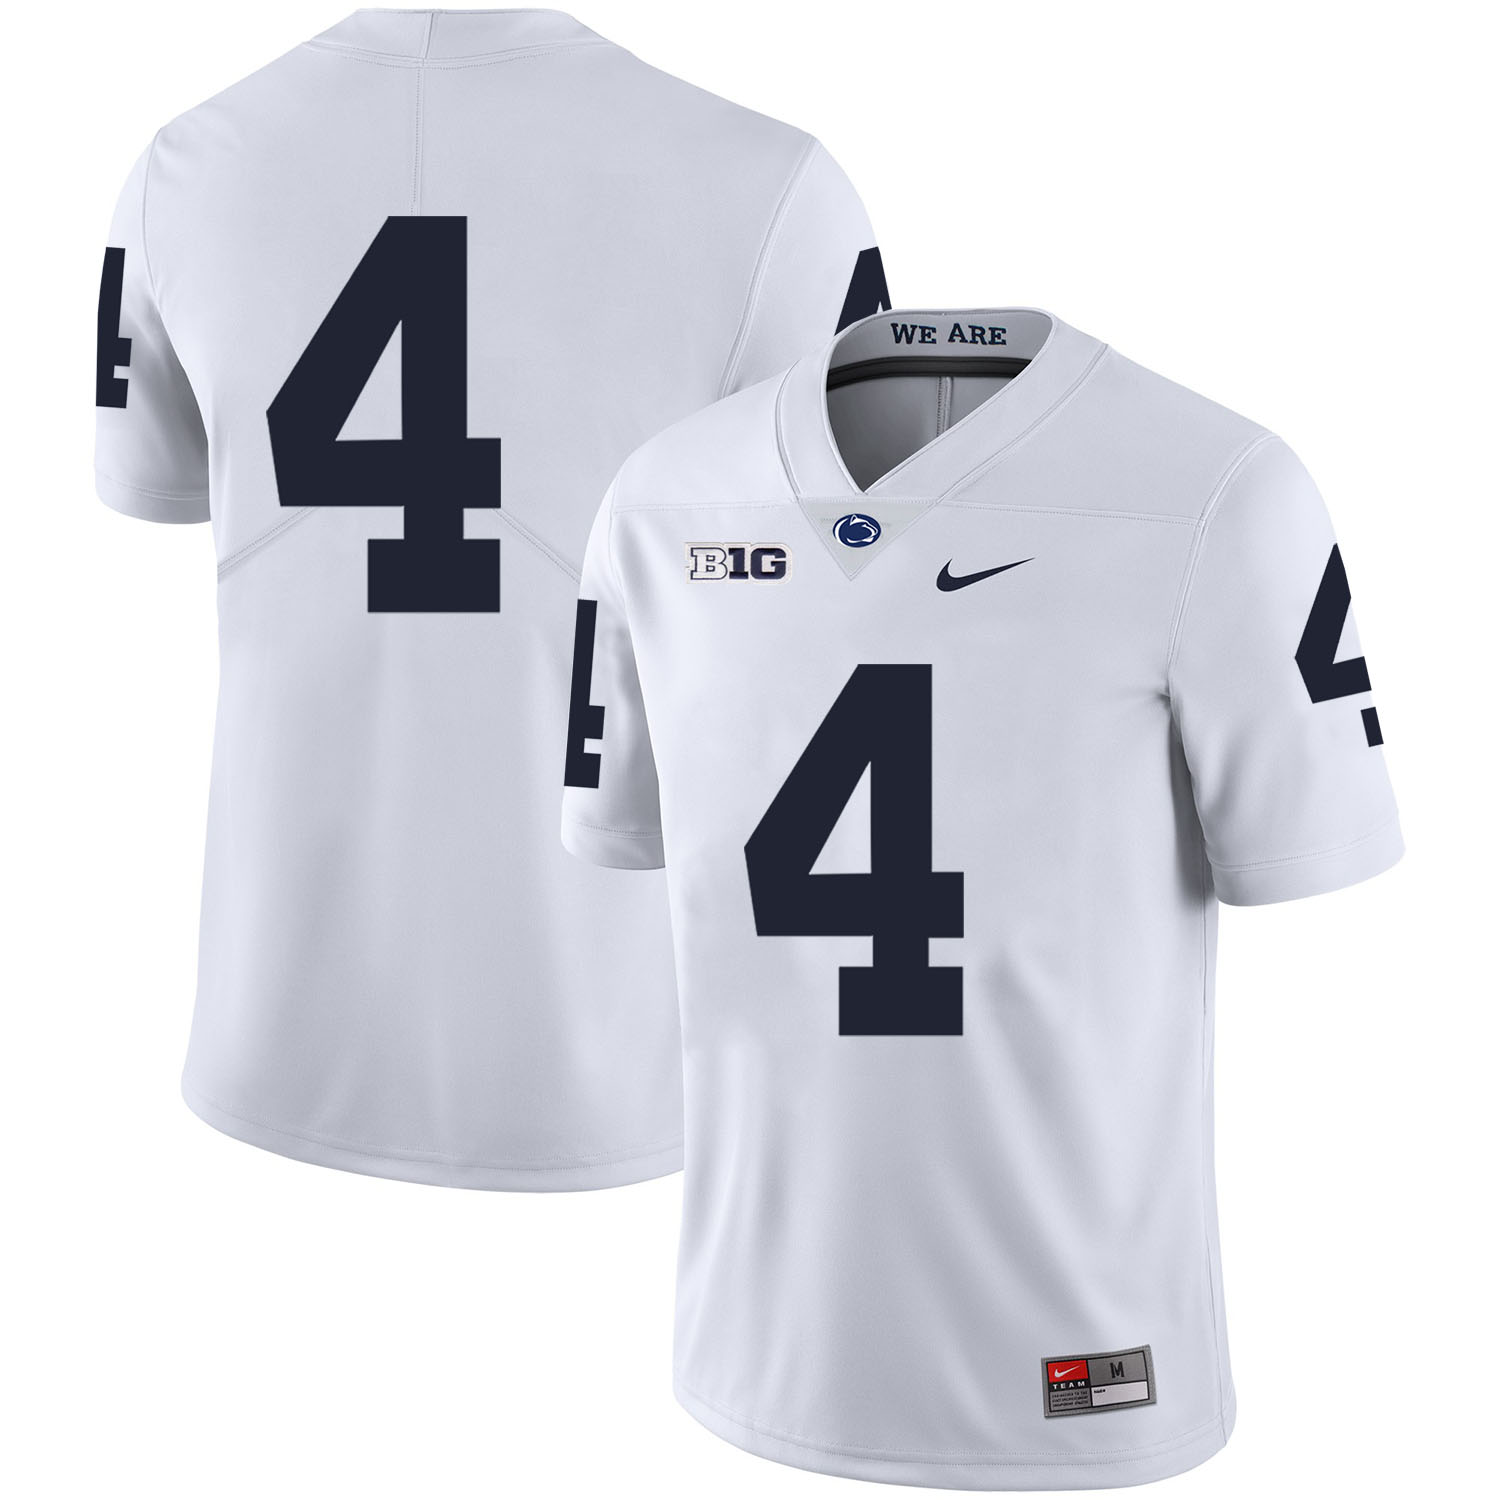 Penn State Nittany Lions 4 Adrian Amos White Nike College Football Jersey